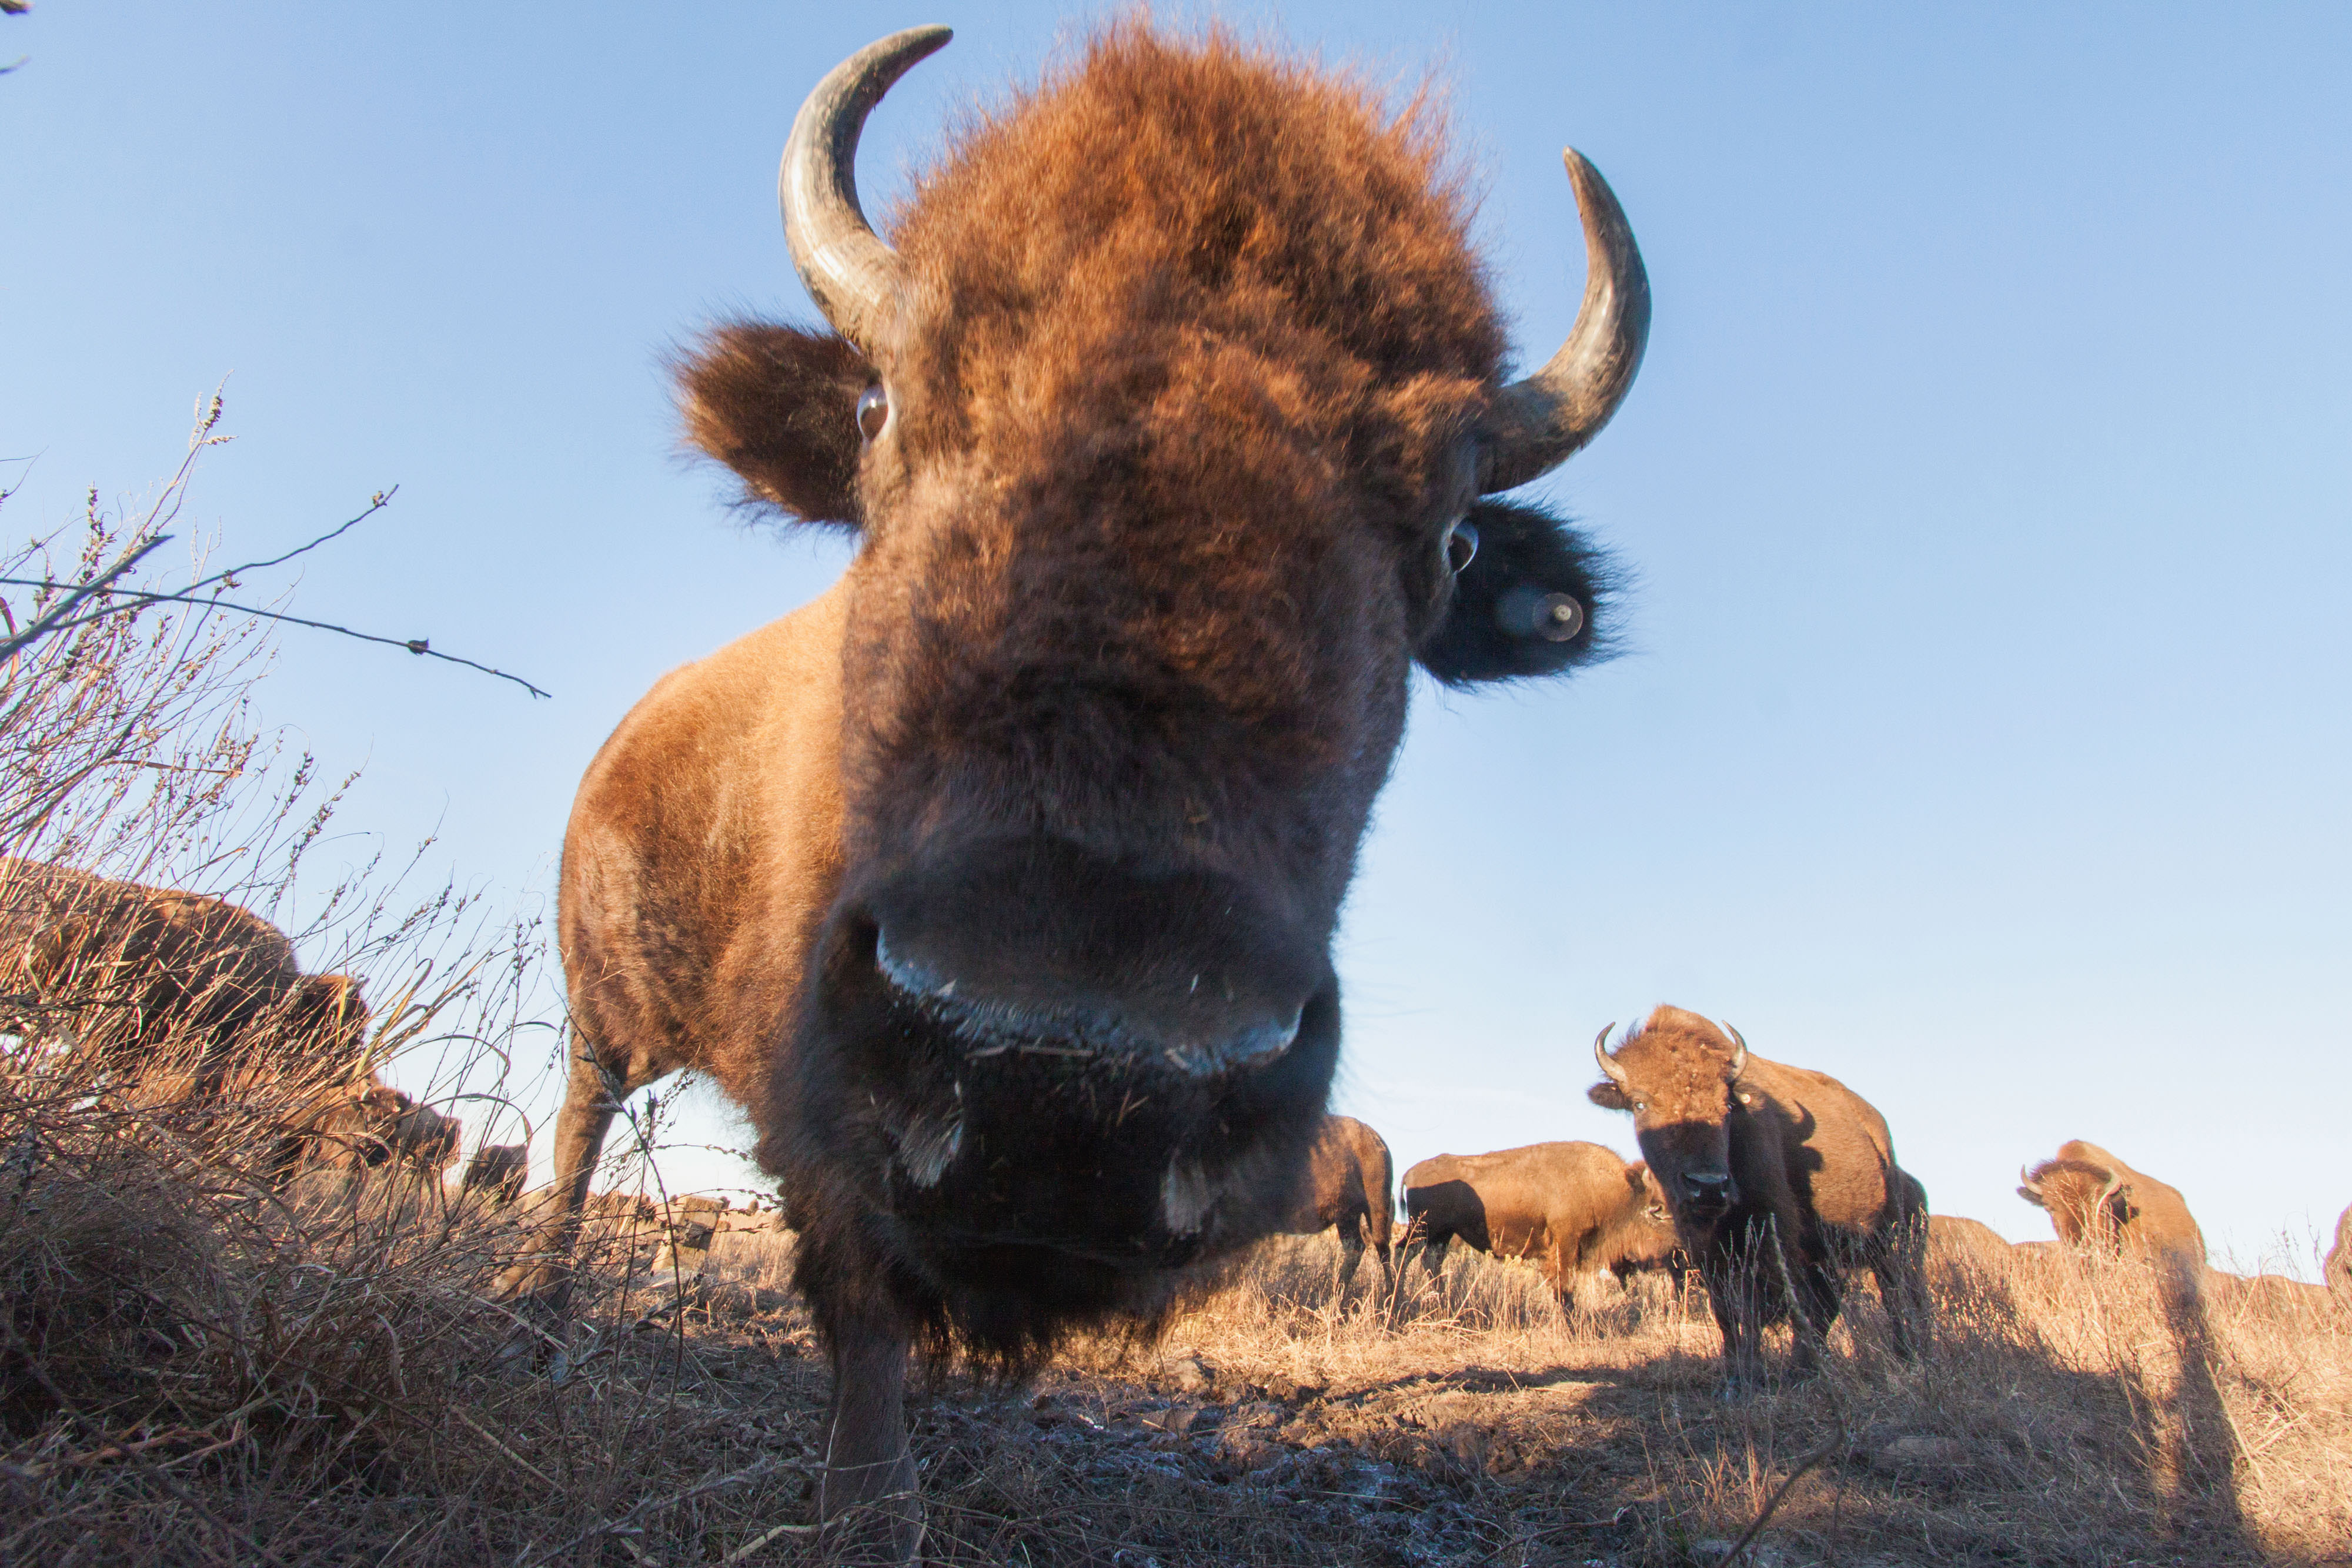 Close-up of an American bison caught by a camera trap hidden in the tallgrass.